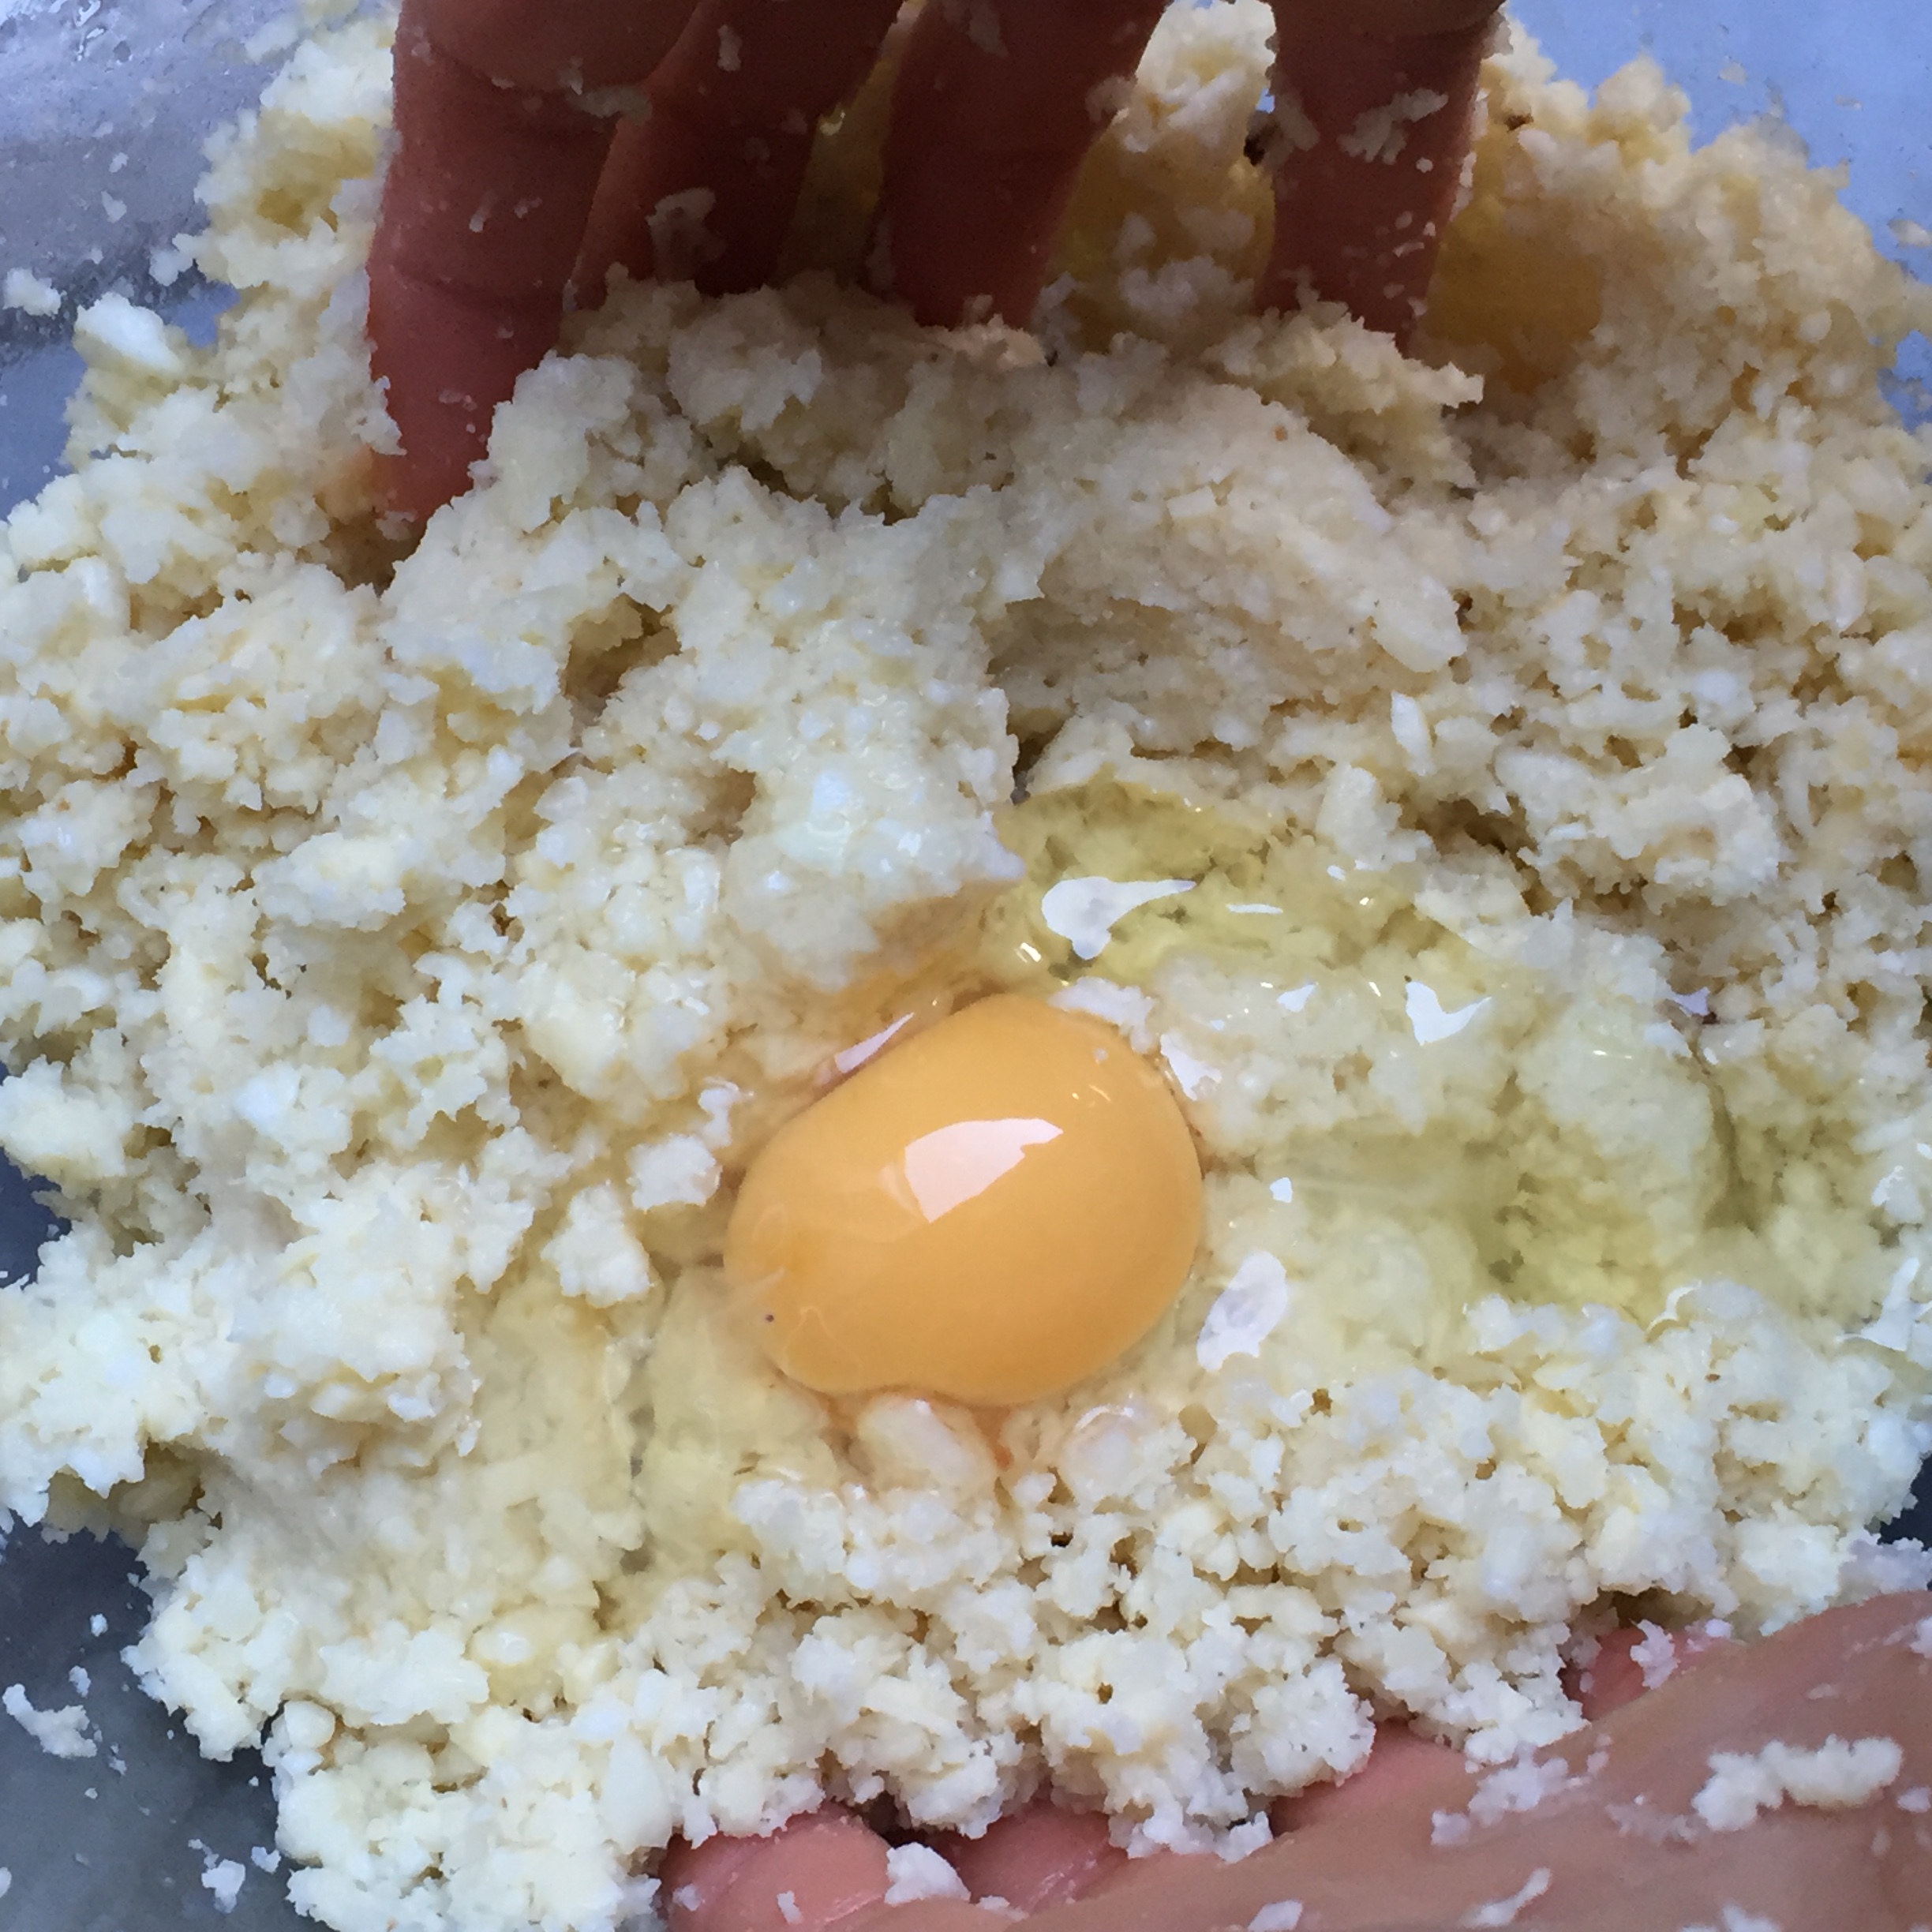 Mixing the egg into the cauliflower rice